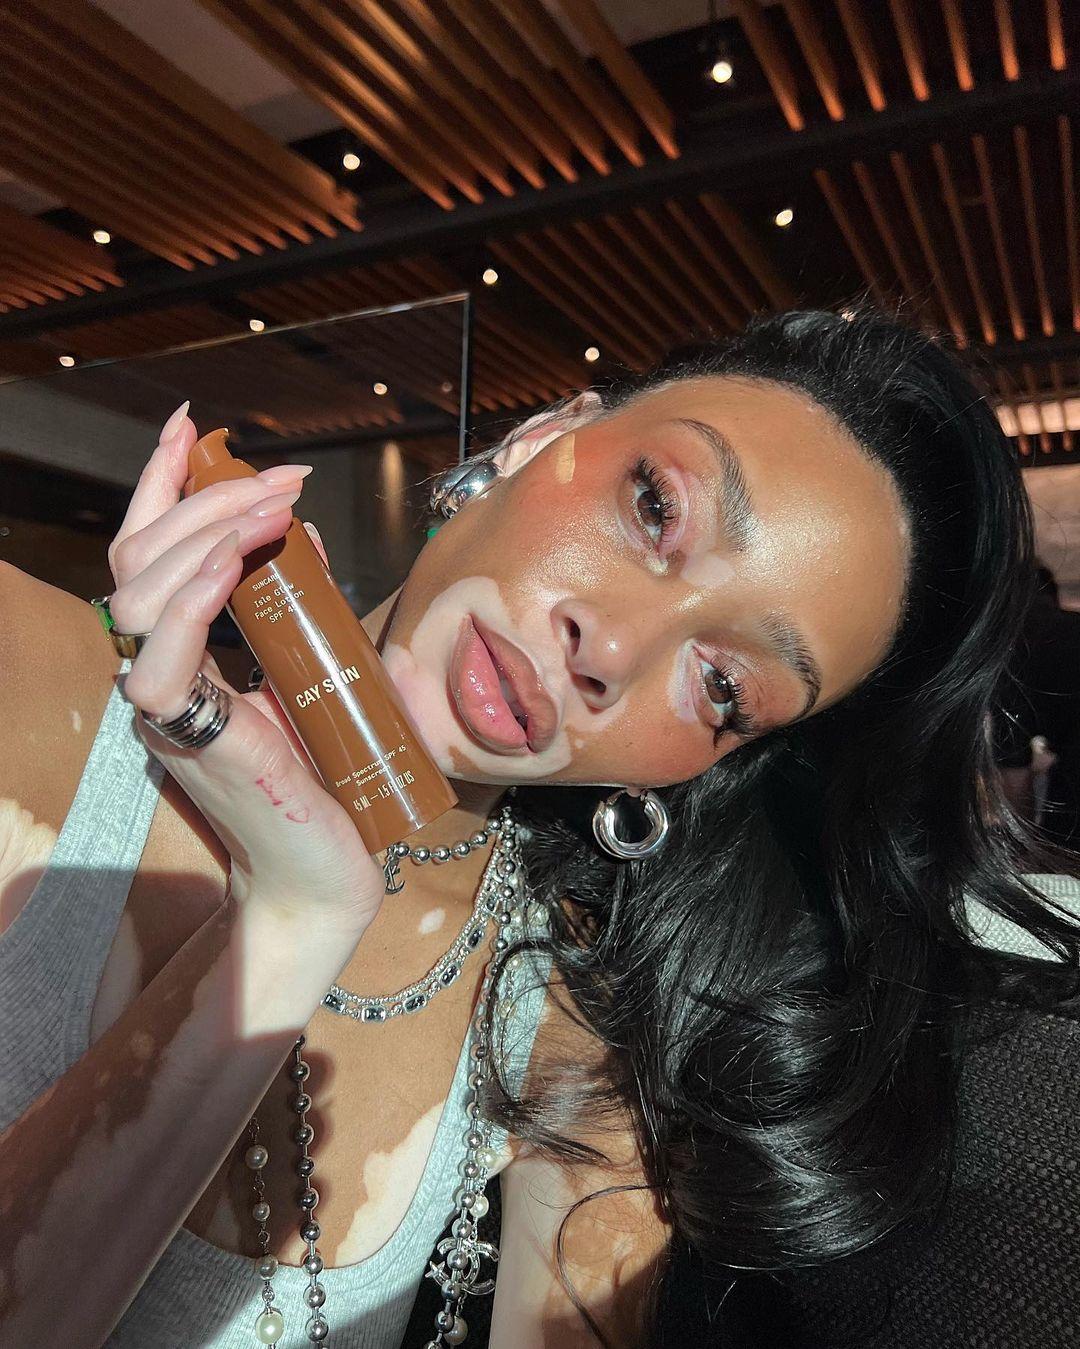 Winnie Harlow launched her own skin line, Cay Skin